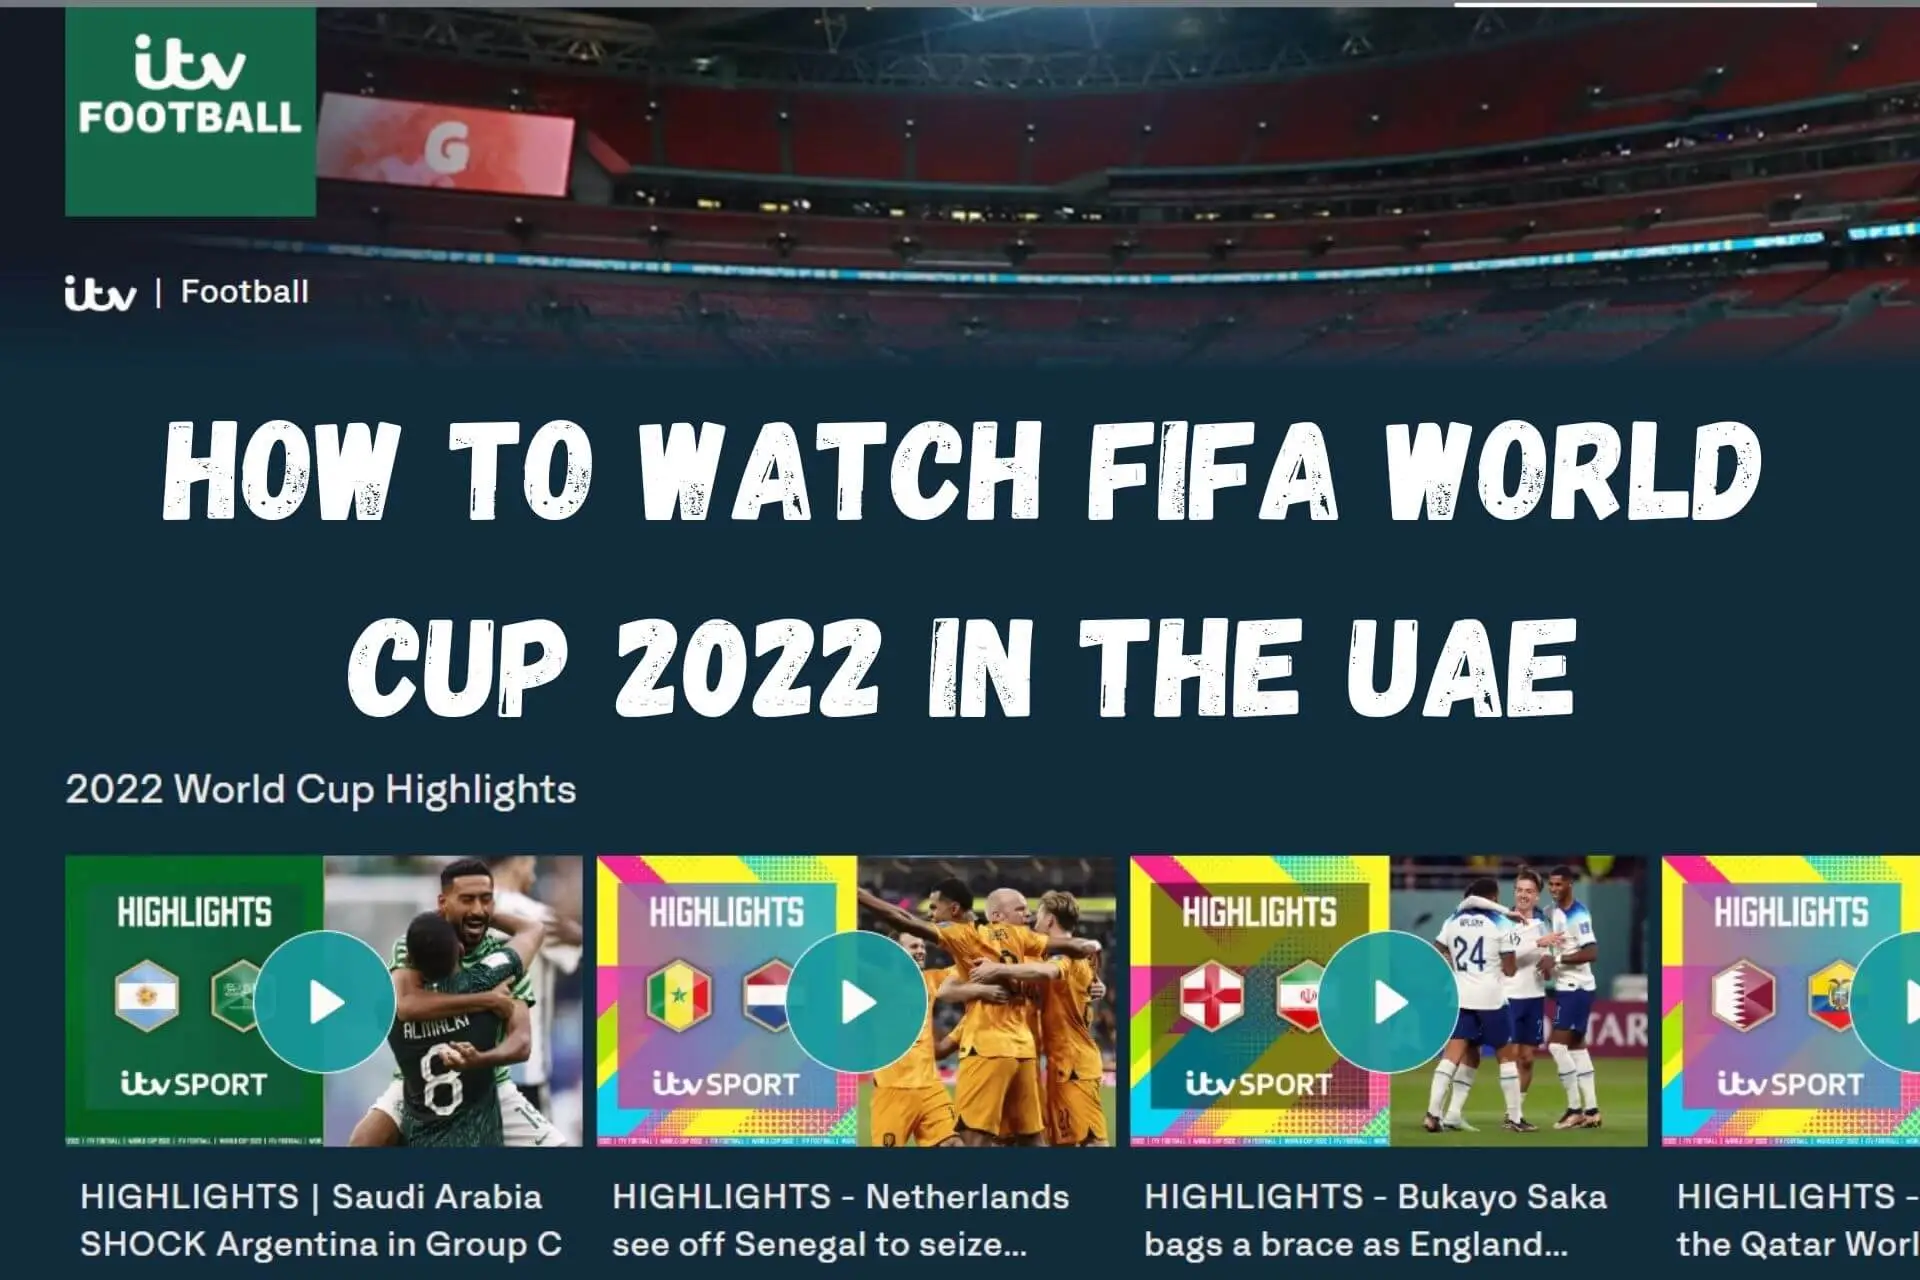 how can i watch fifa world cup 2022 in uae